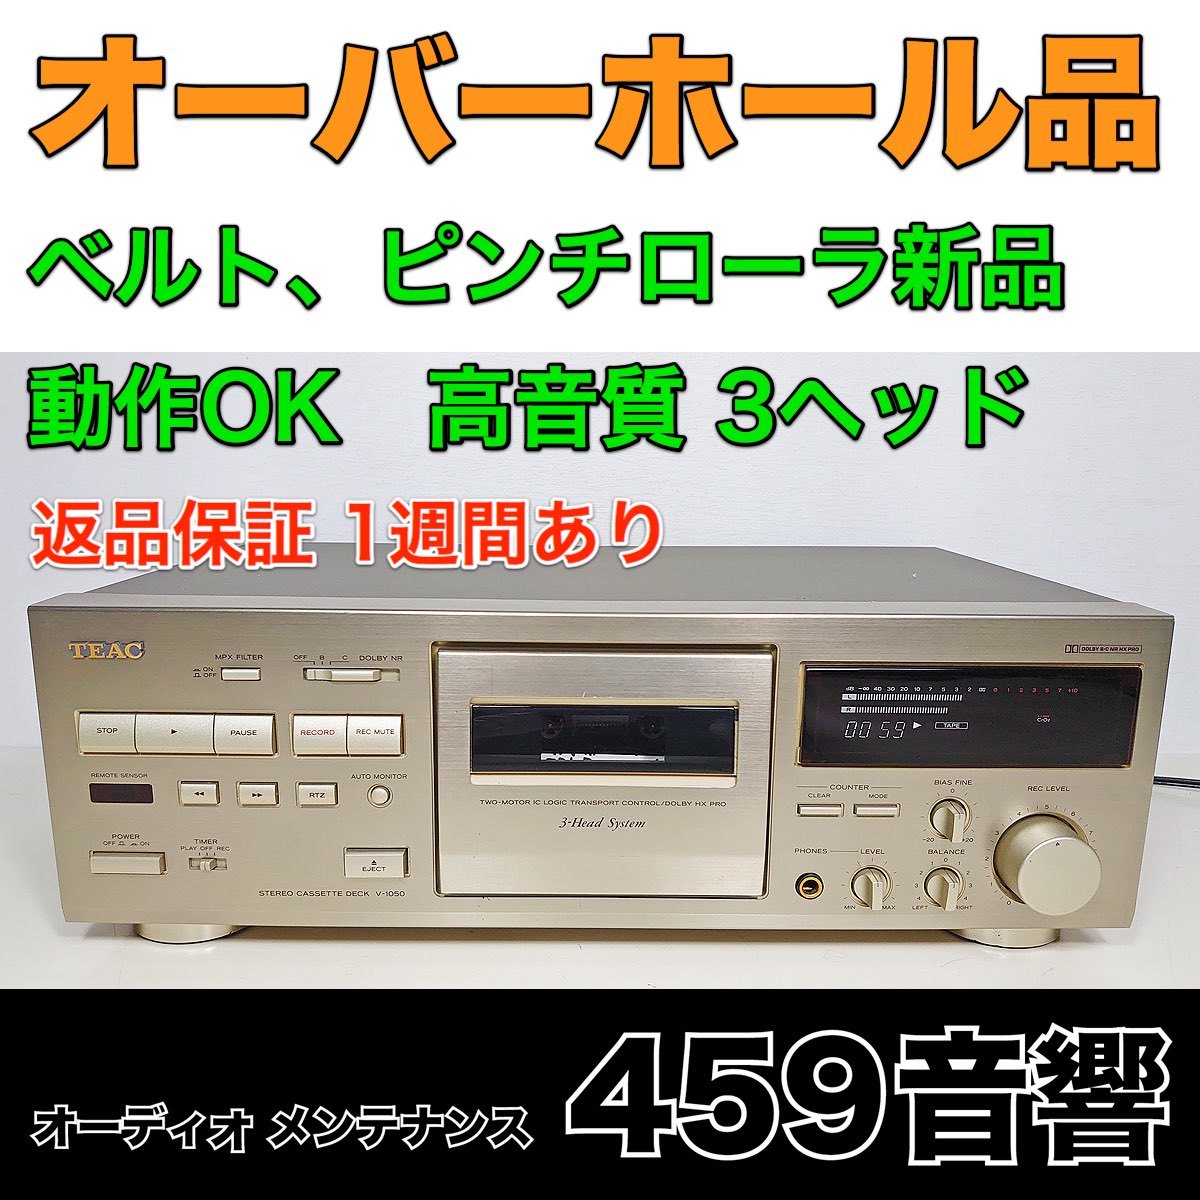 1143 TEAC ティアック カセットデッキ V-1010-